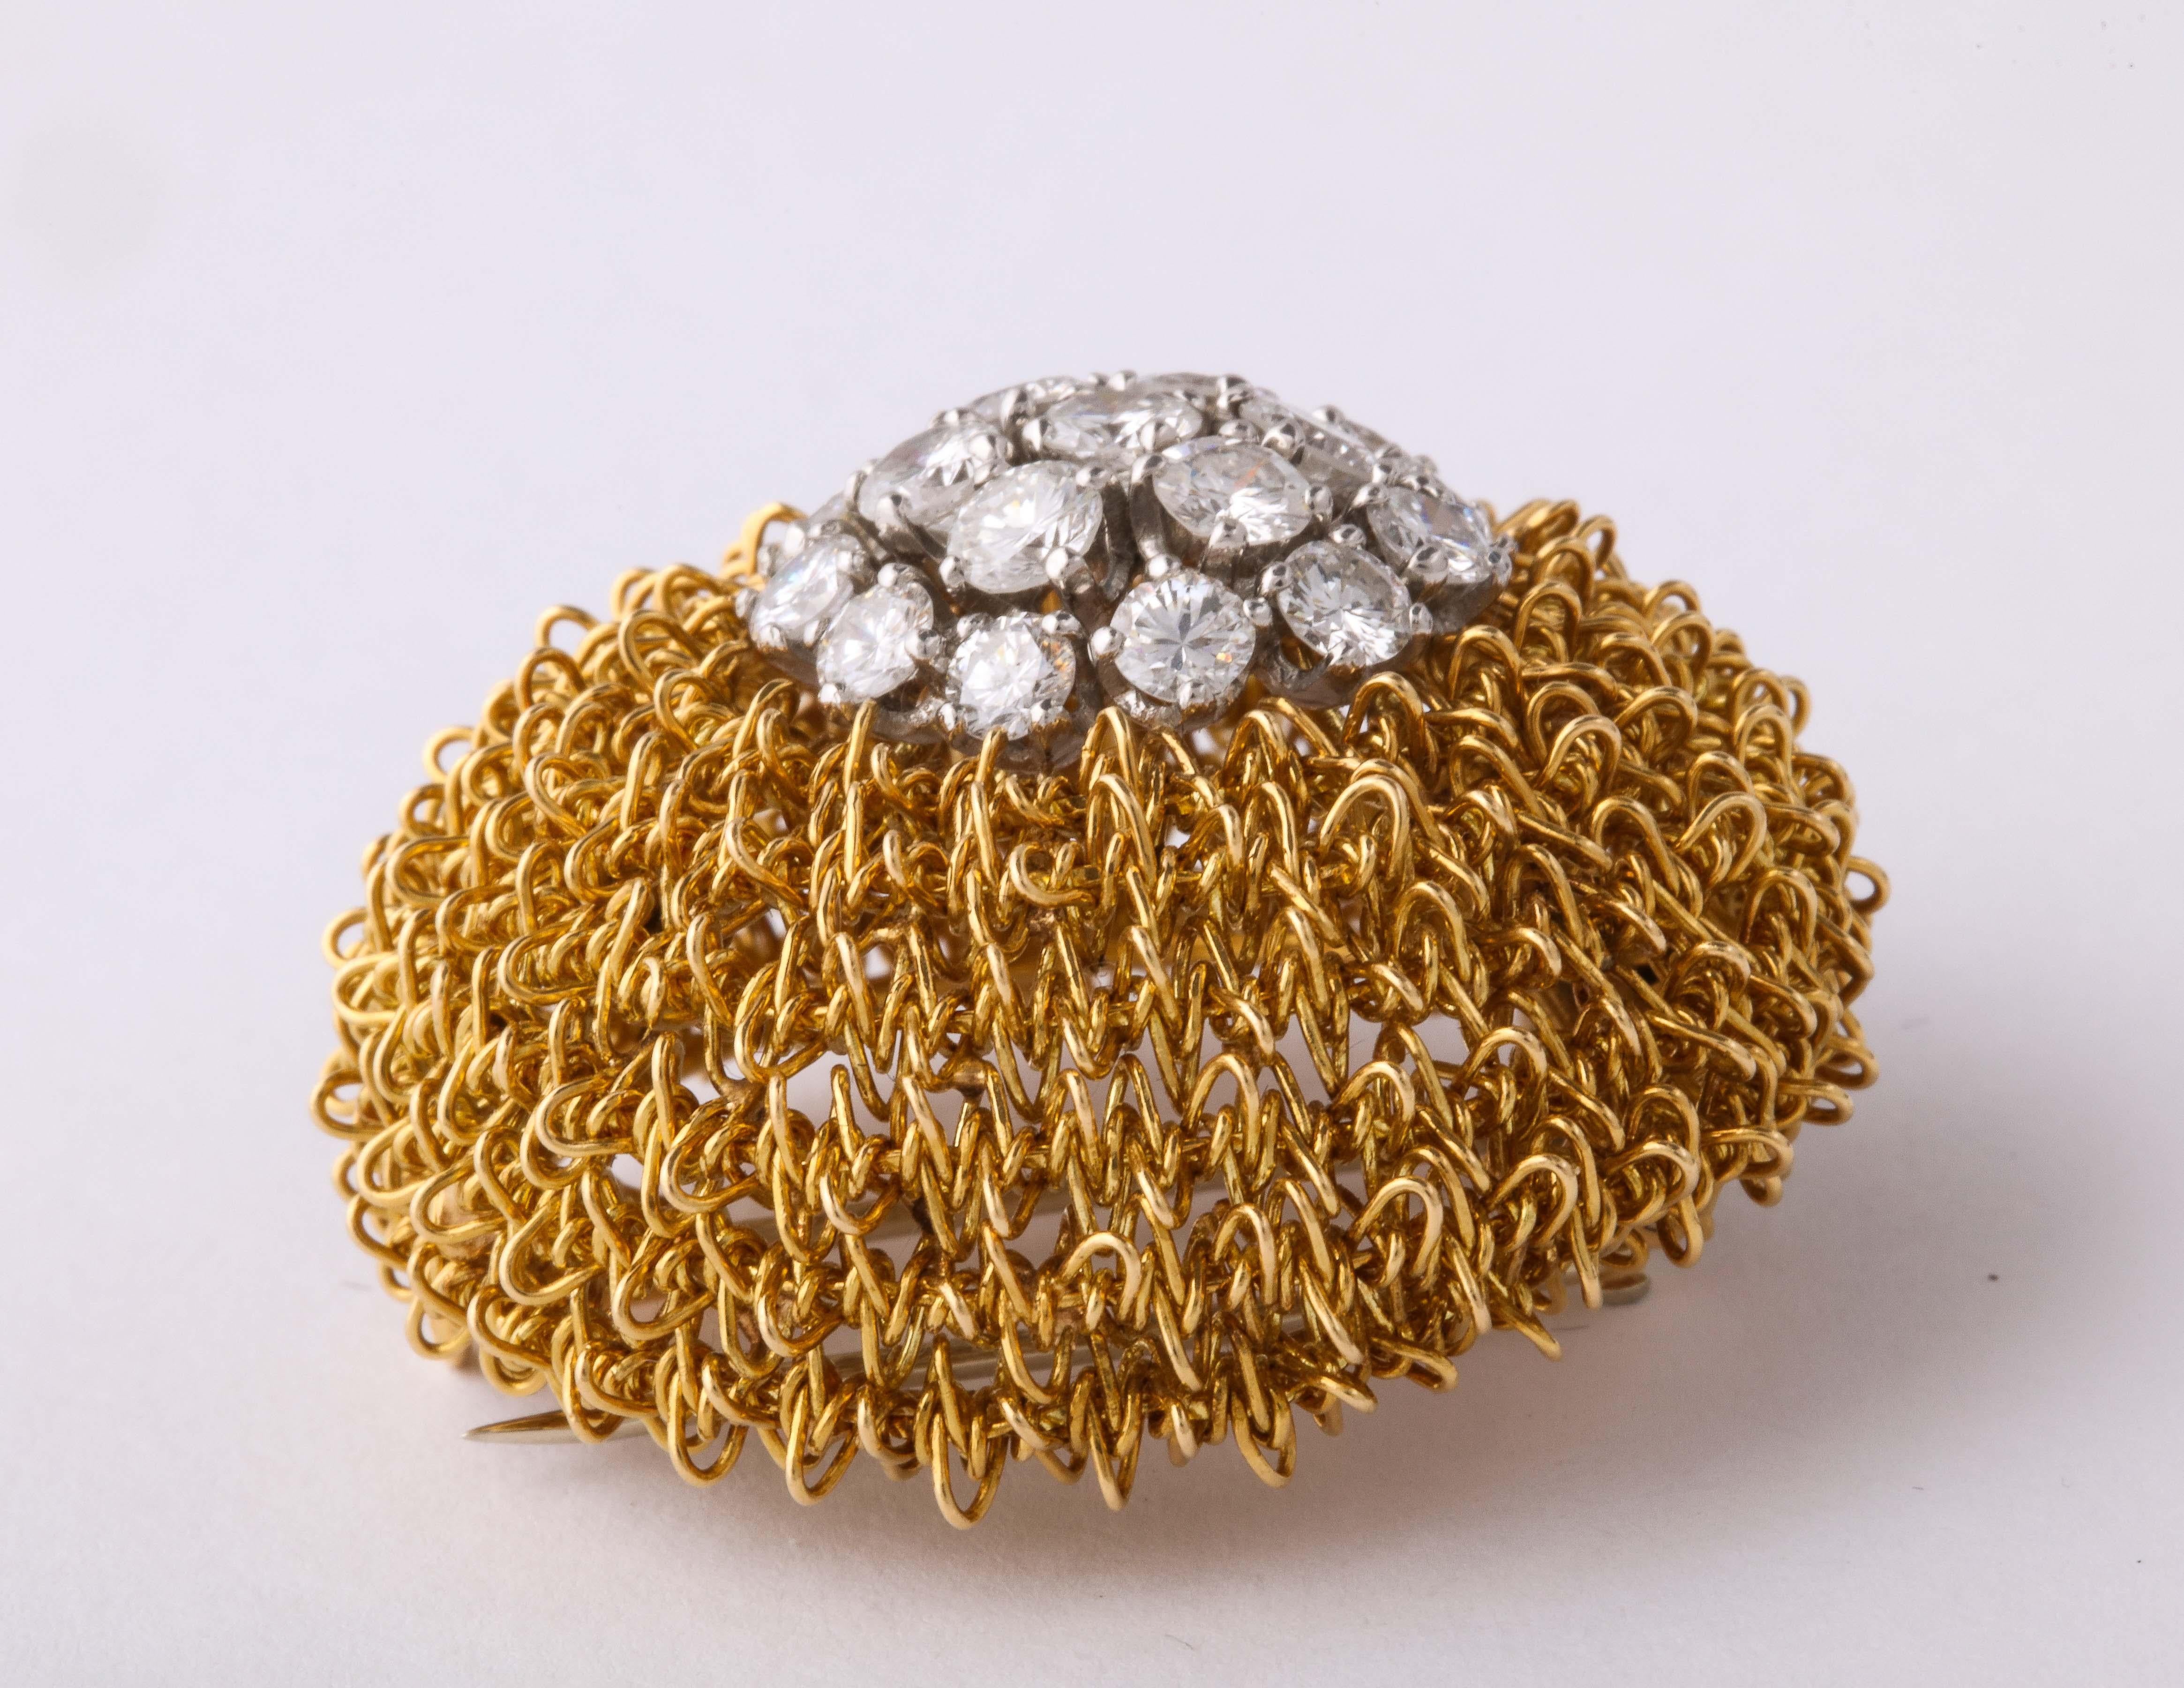 Elegant and super chic for that late afternoon Cocktail at The Ritz.   18kt Woven Gold Pin with 19 clean & very white Full Cut Diamonds - prong set - and slightly asymmetrically set on the Clip.  Around 4 carats total.  Marked VCA 6518K  Made in